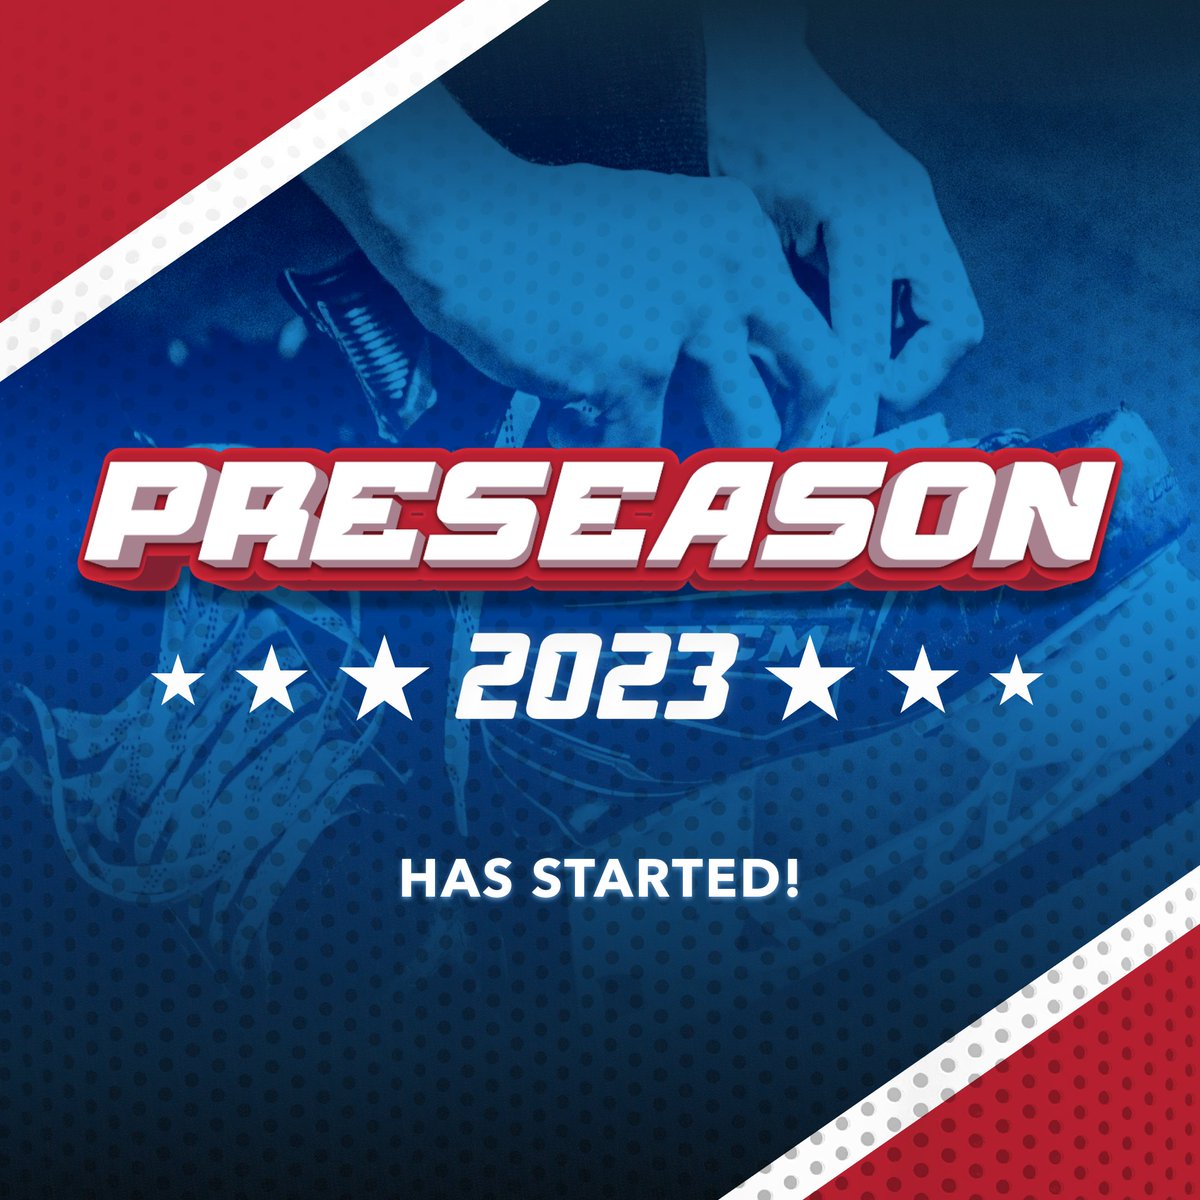 We are live! Starting now, we enter the Rookie and Pre-Season cups, split into two games, one for the Rookies and one for the more established teams making for total inclusivity. In an hour the Pre-Season social weekend begins with some awesome rewards for you to win.